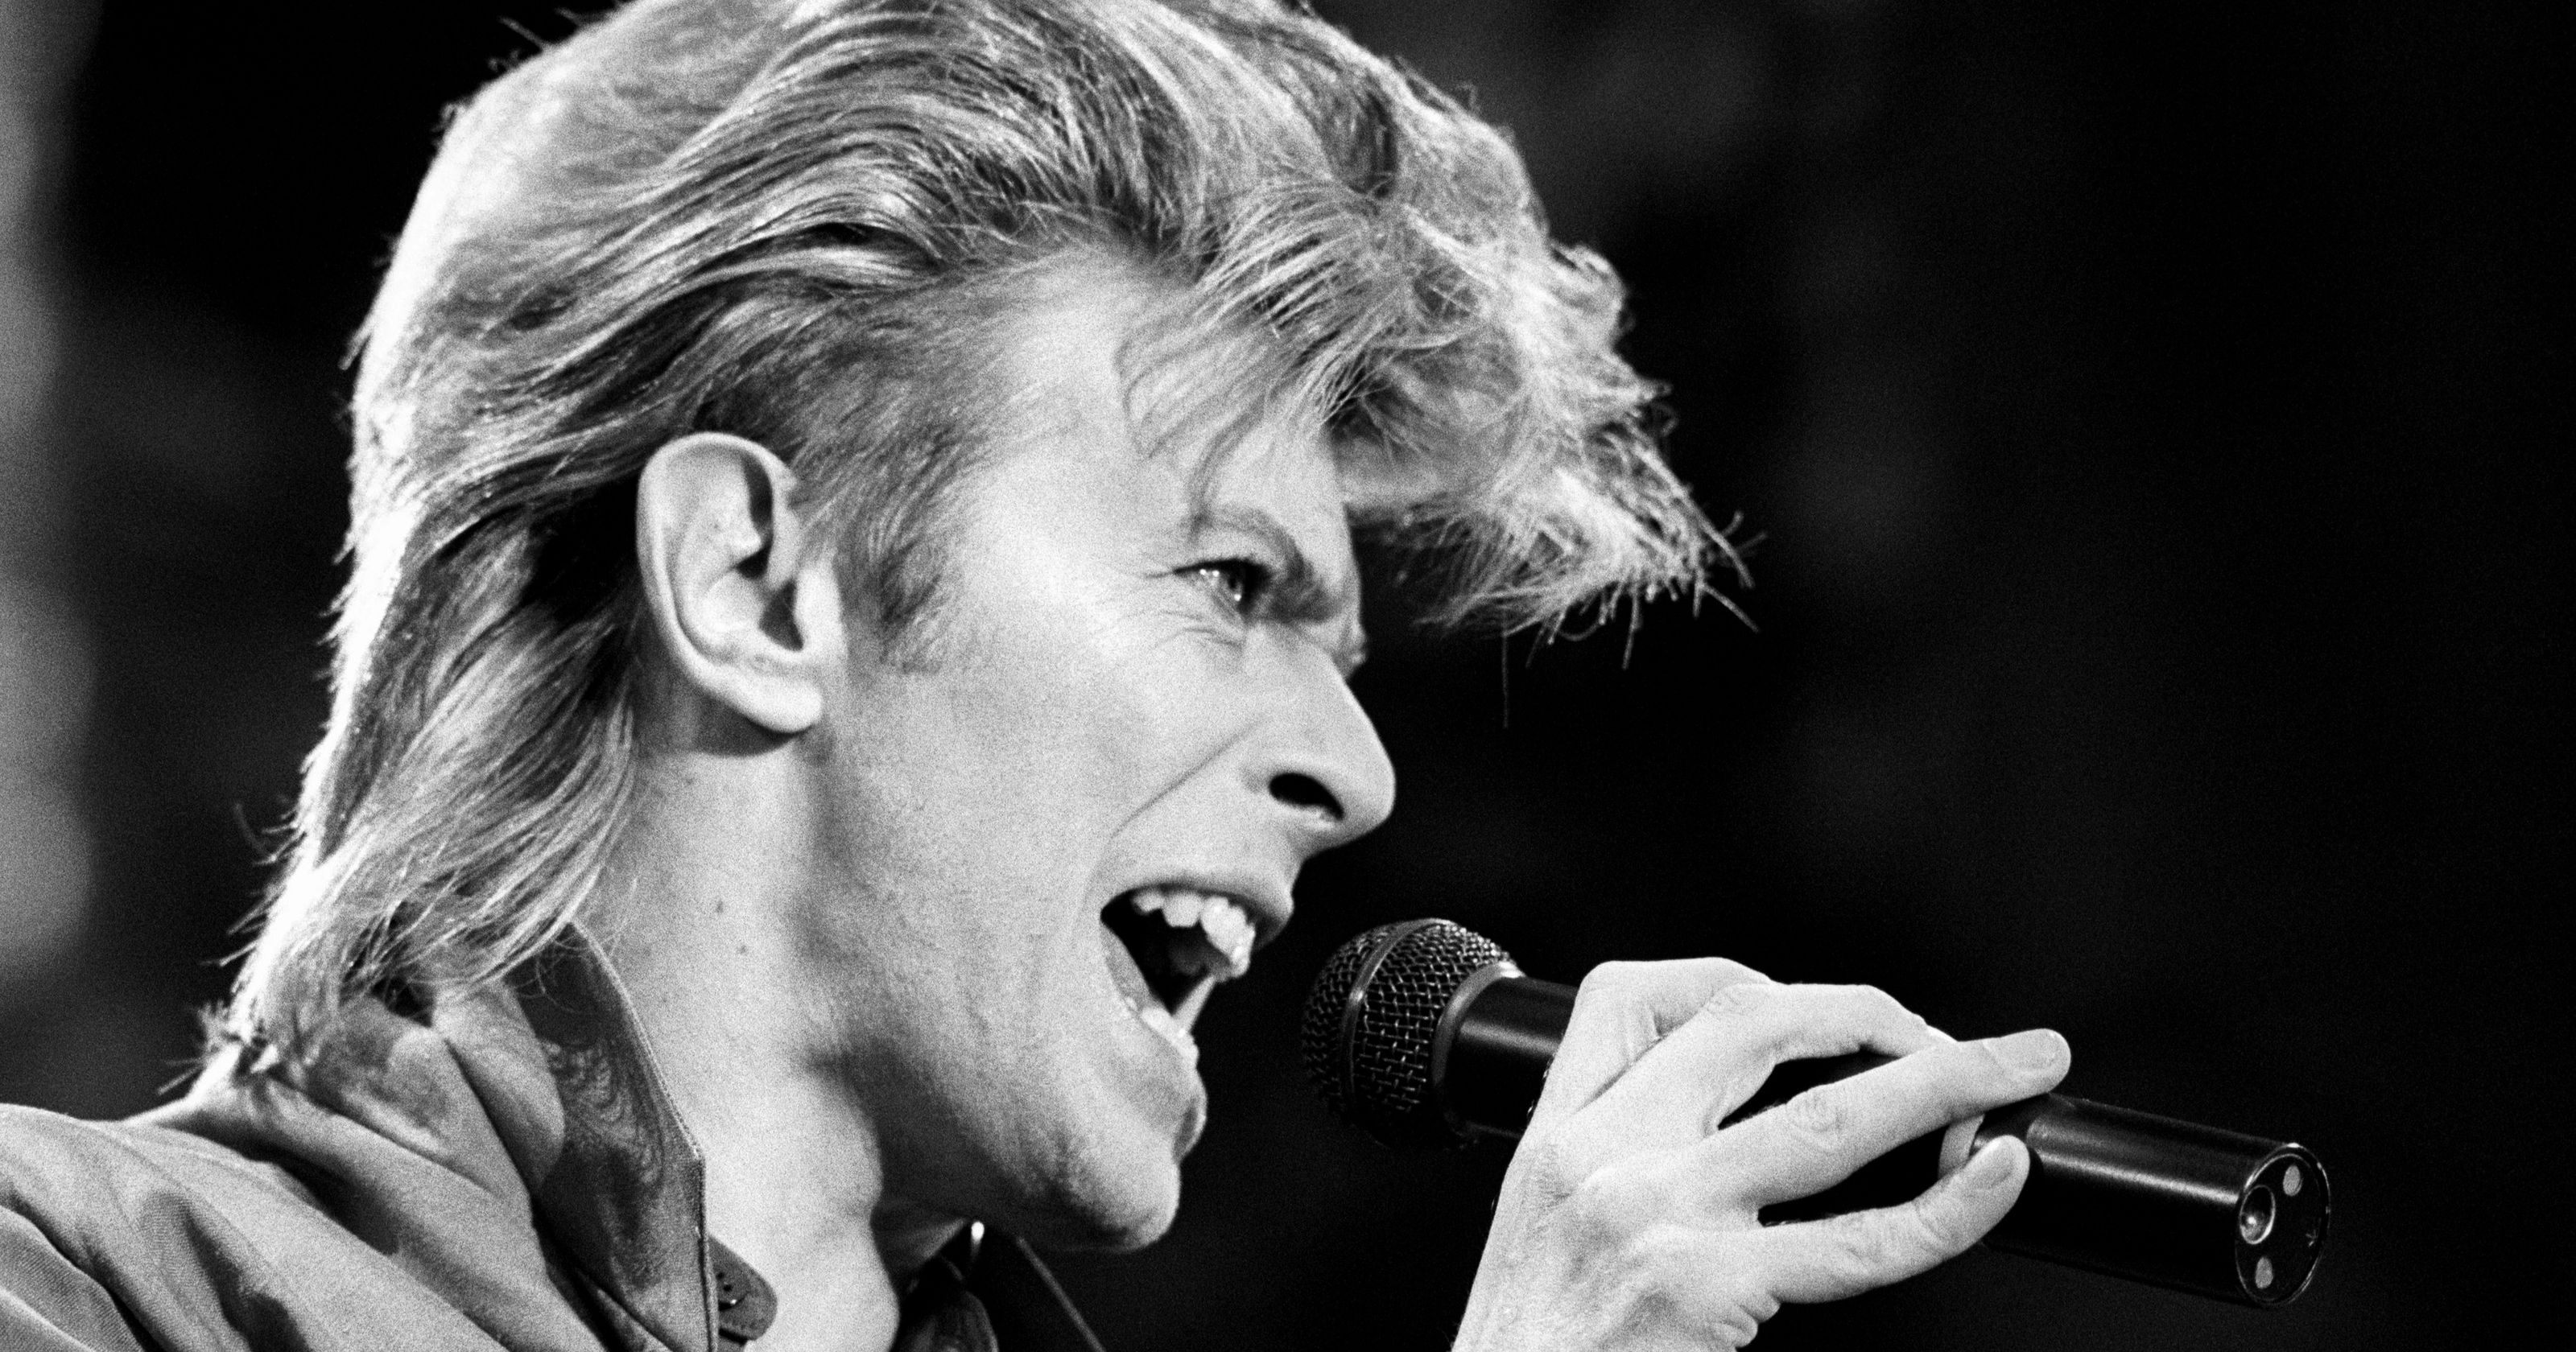 David Bowie: One of the most influential musicians of the 20th century. 3200x1680 HD Background.